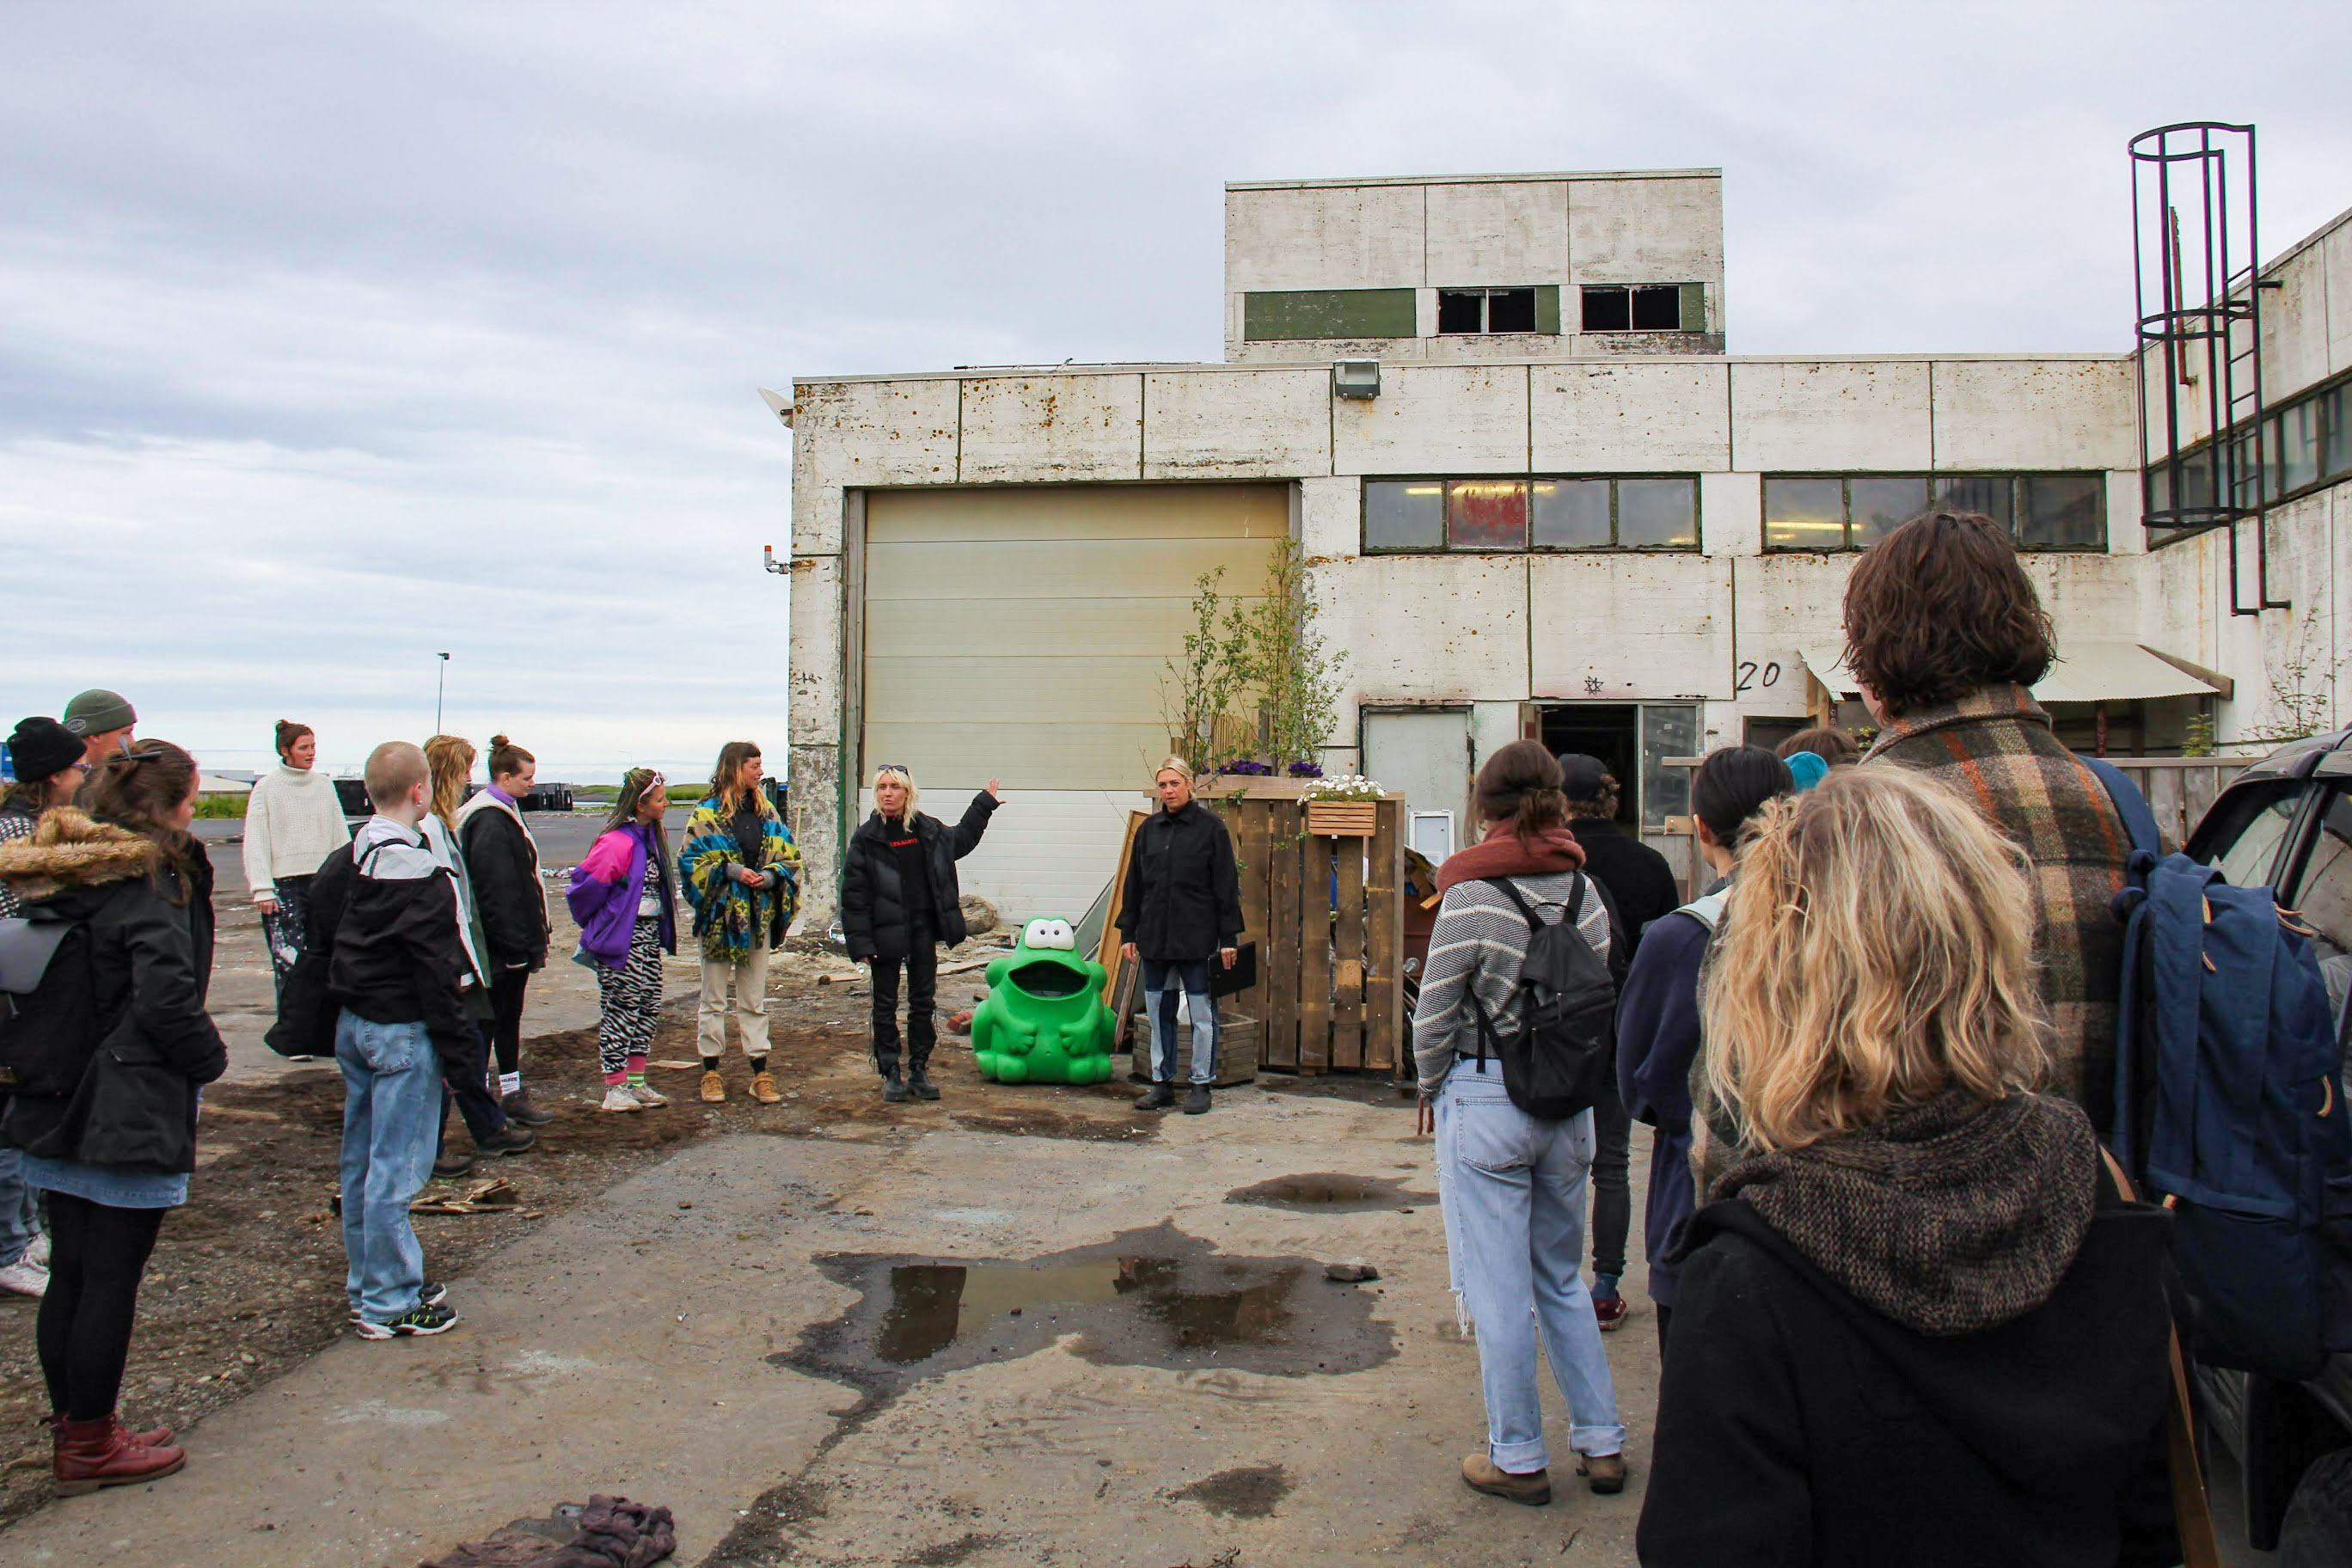 A group of people standing outside an industrial looking building.